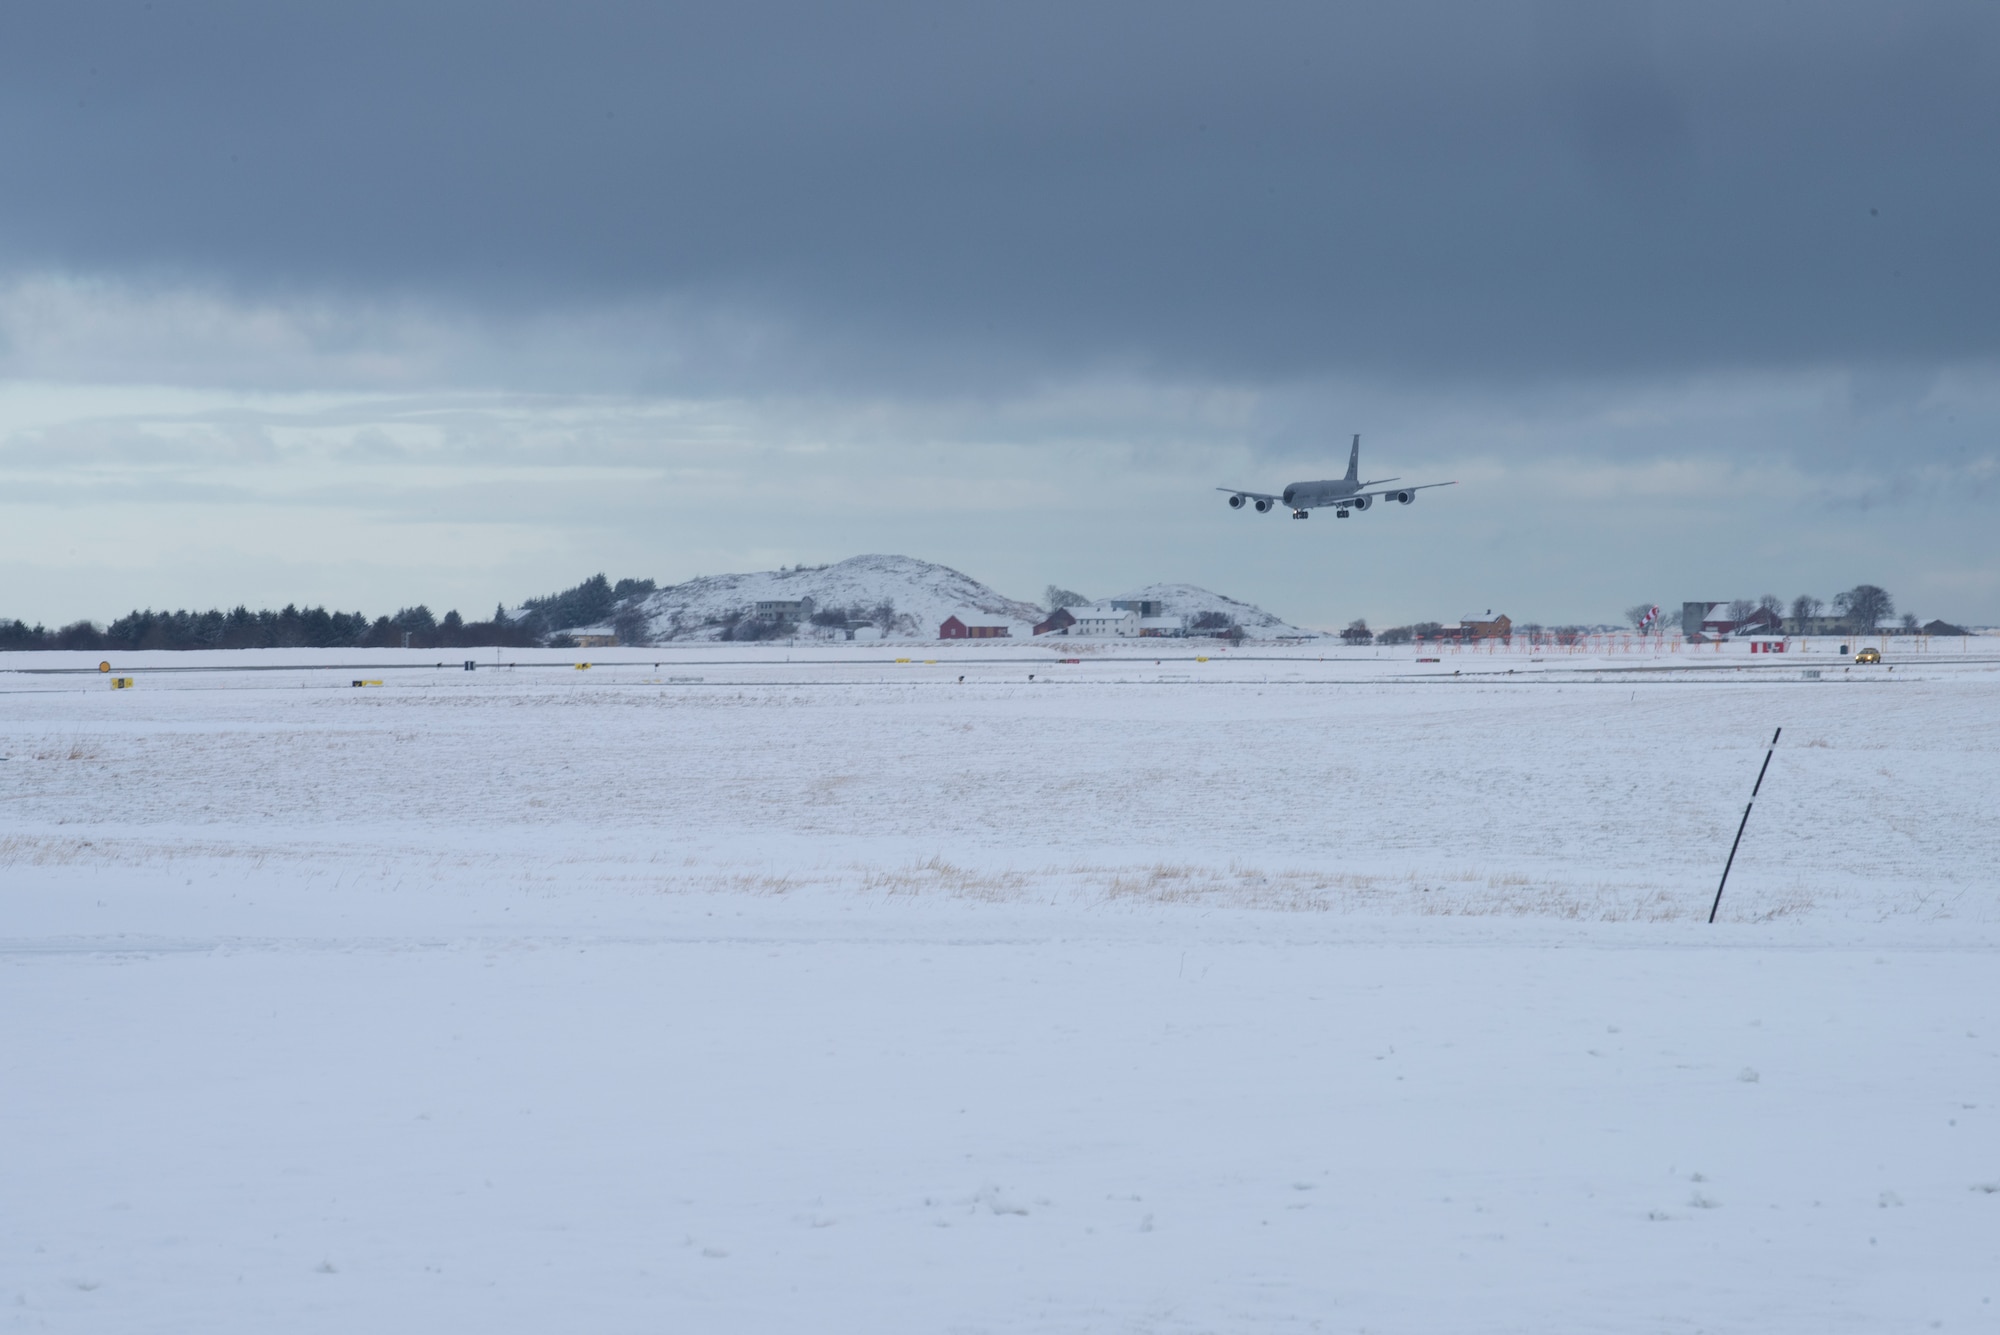 Military refueling aircraft preparing to land onto snowy runway.